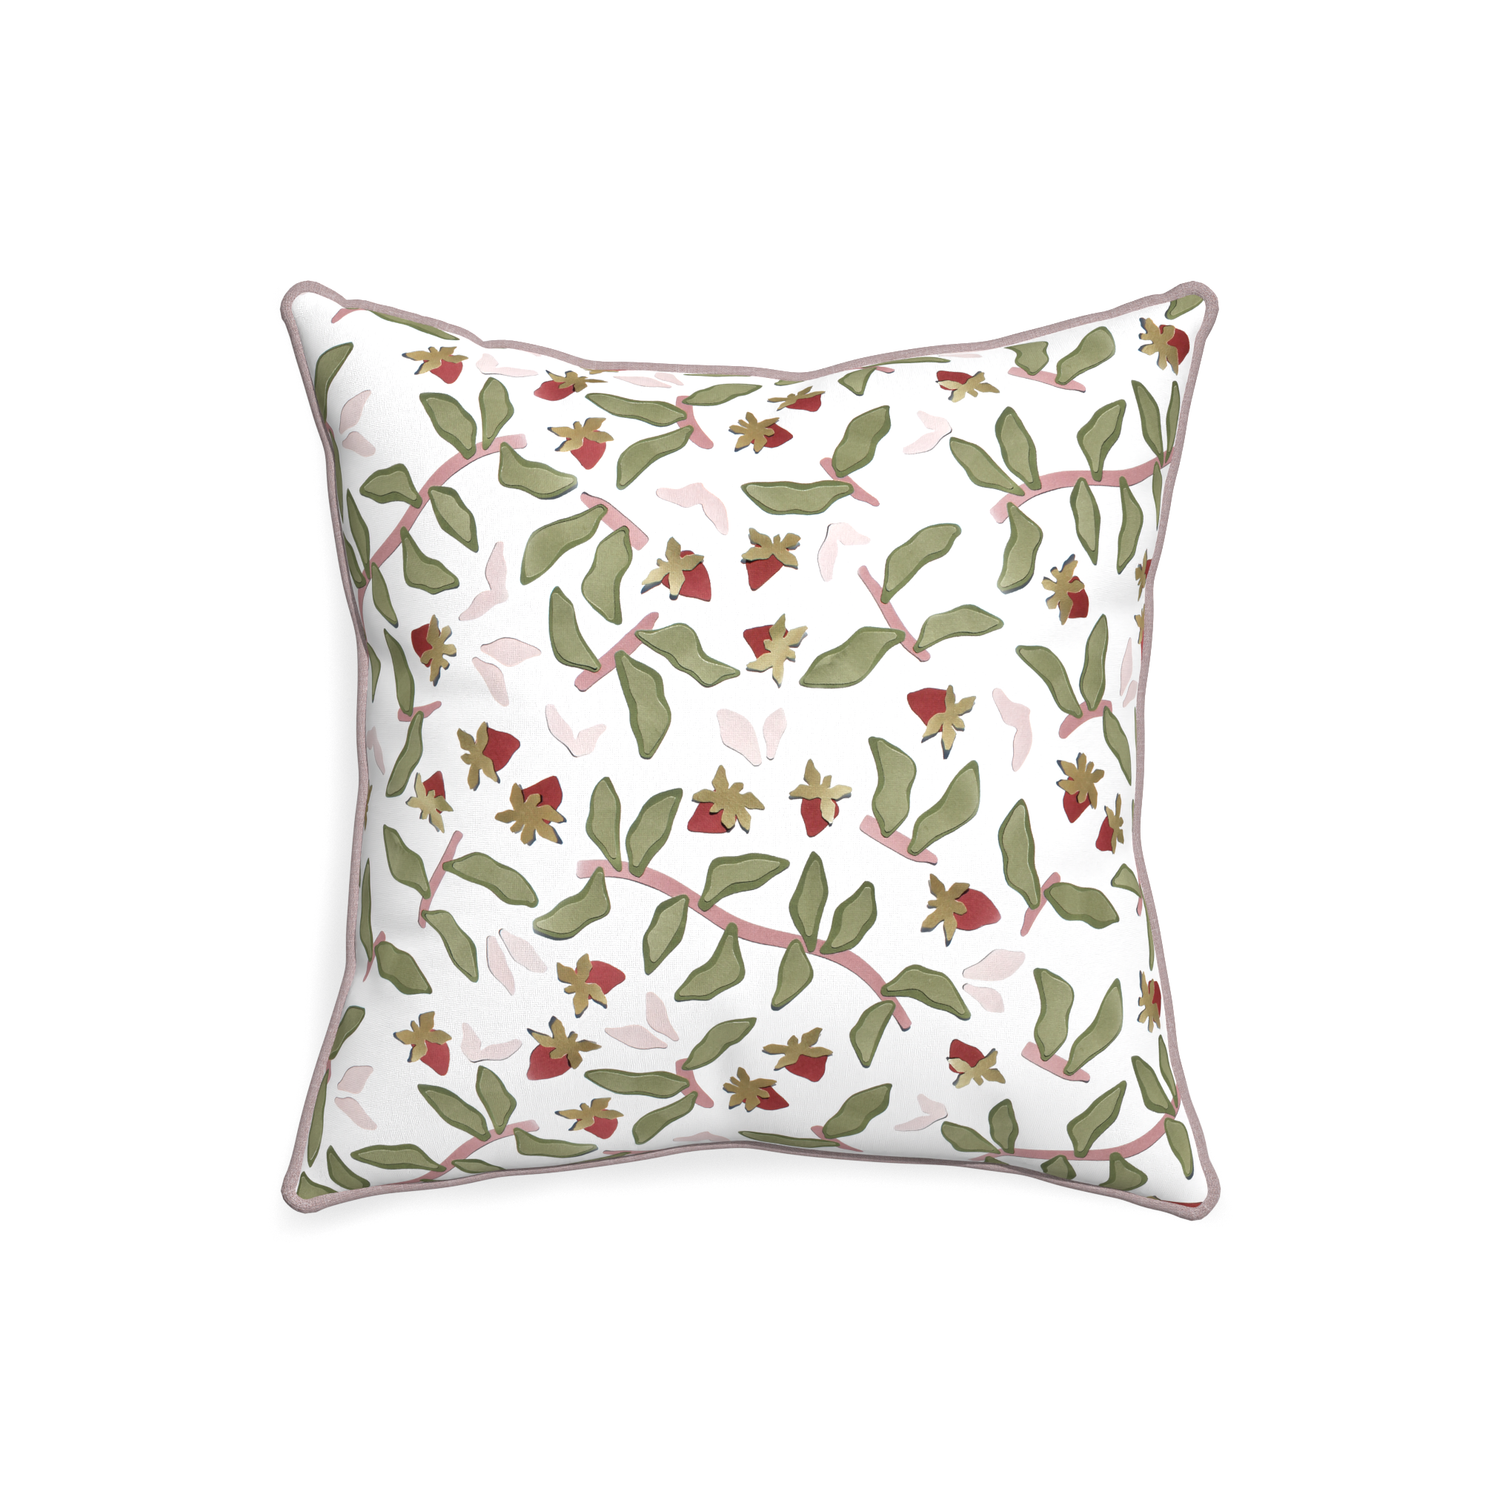 20-square nellie custom strawberry & botanicalpillow with orchid piping on white background